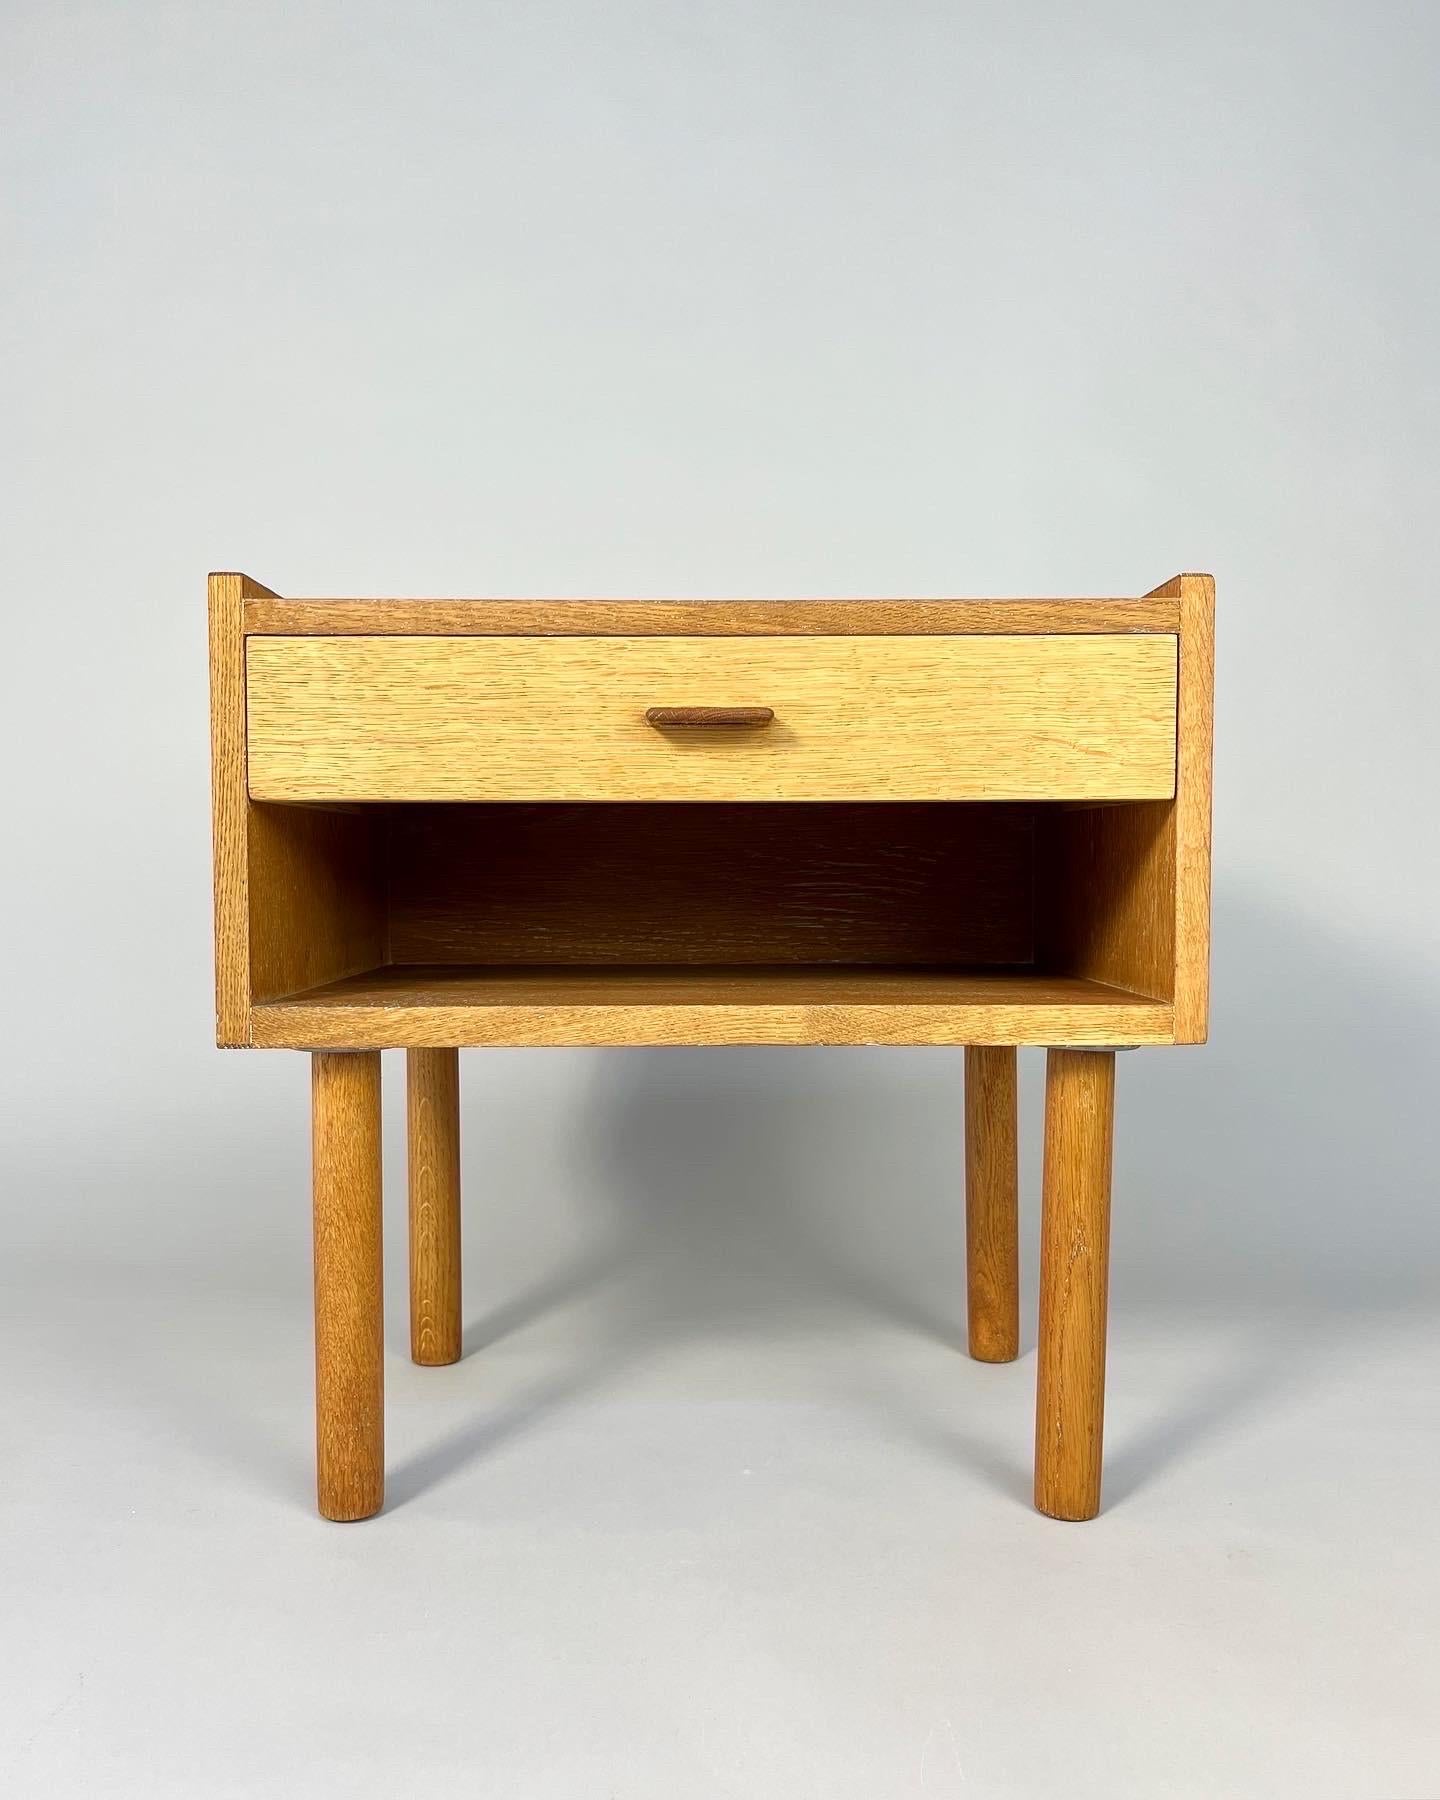 Hans Wegner nightstand in oak, model No. 430 manufactured by Ry Møbler Denmark, in the 1960s.

The surface used to be lacquered in white, the oak was completely restored and refinished with oil. Good condition with some remaining white spots, front